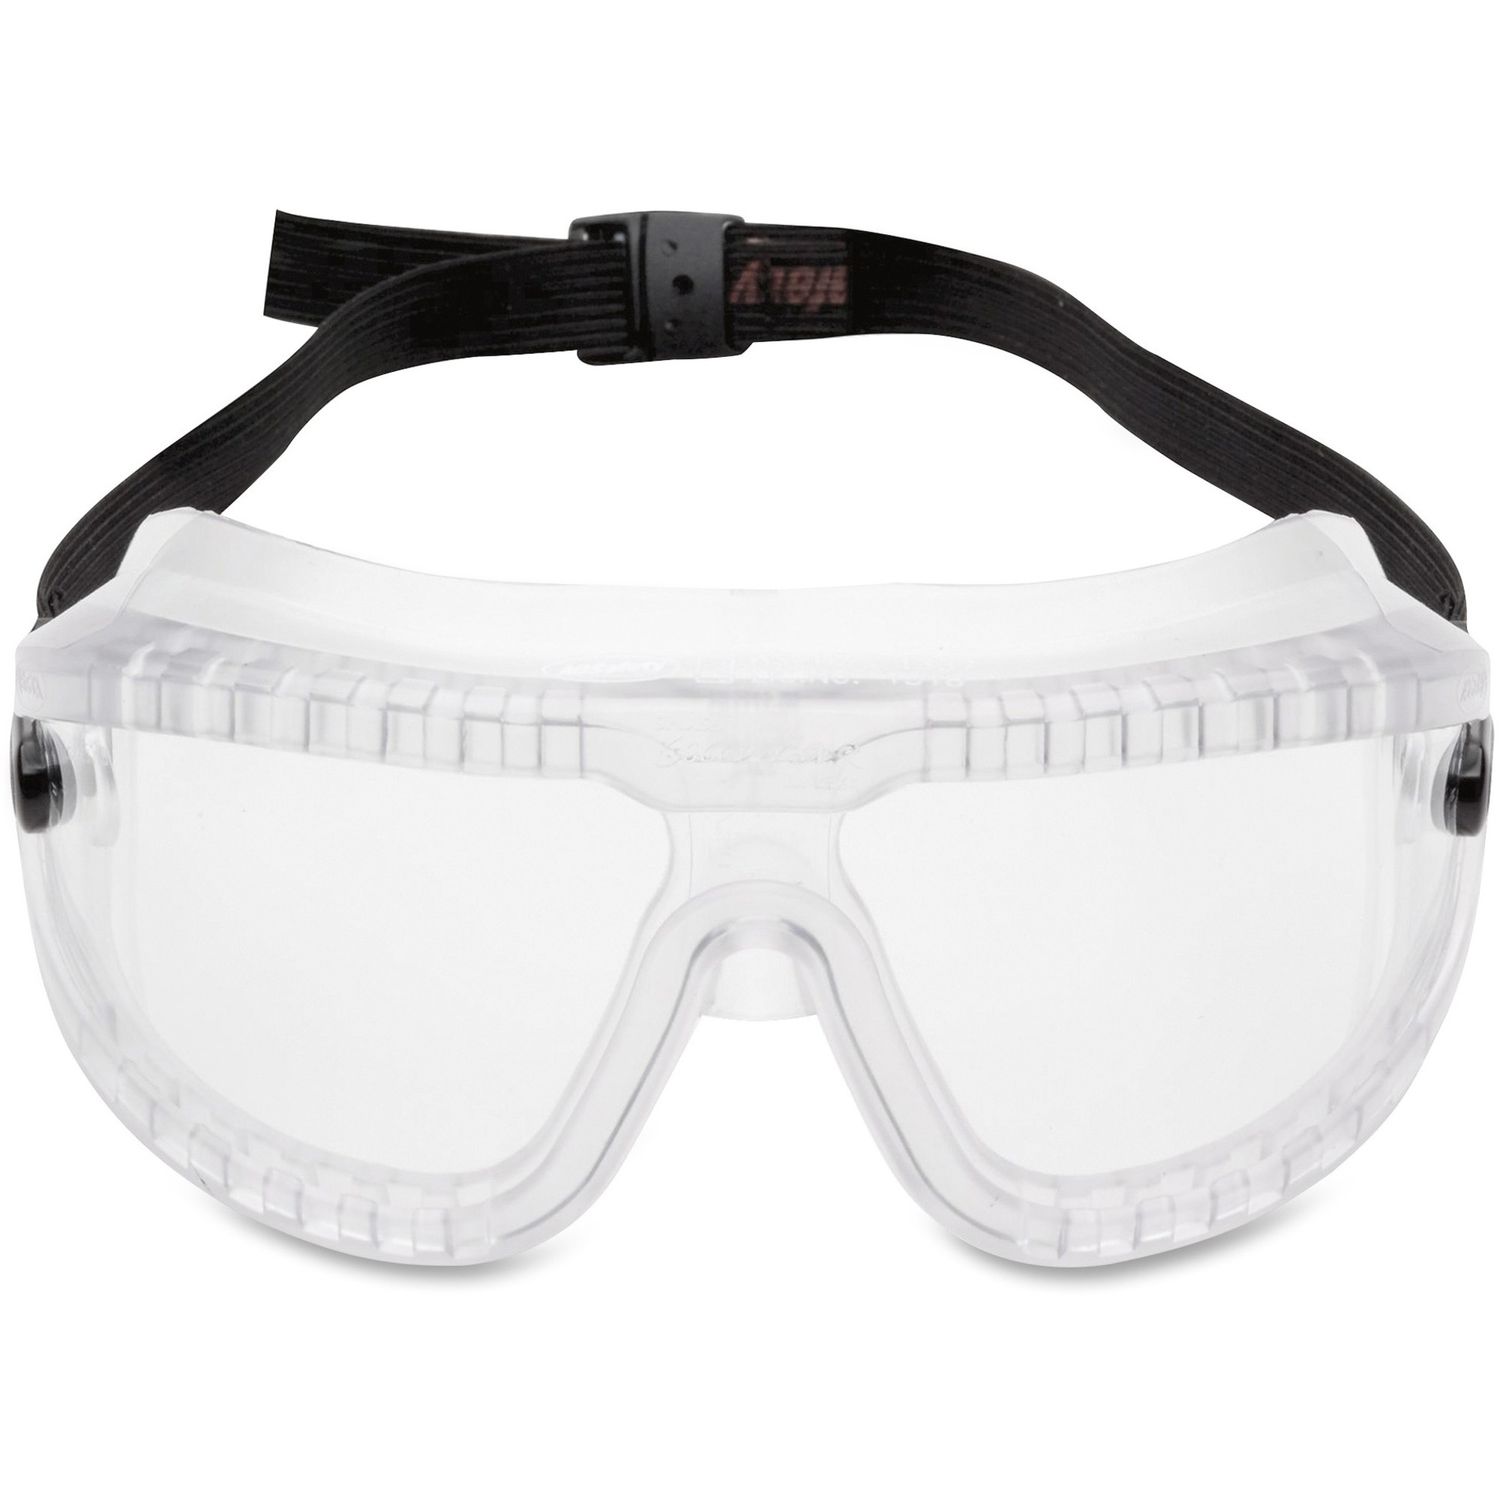 Large GoggleGear Safety Goggles Lightweight, Comfortable, Scratch Resistant, Fog Resistant, Chemical Resistant, Adjustable Headband, Ventilation, Large Size, Clear, Clear, 1 Each